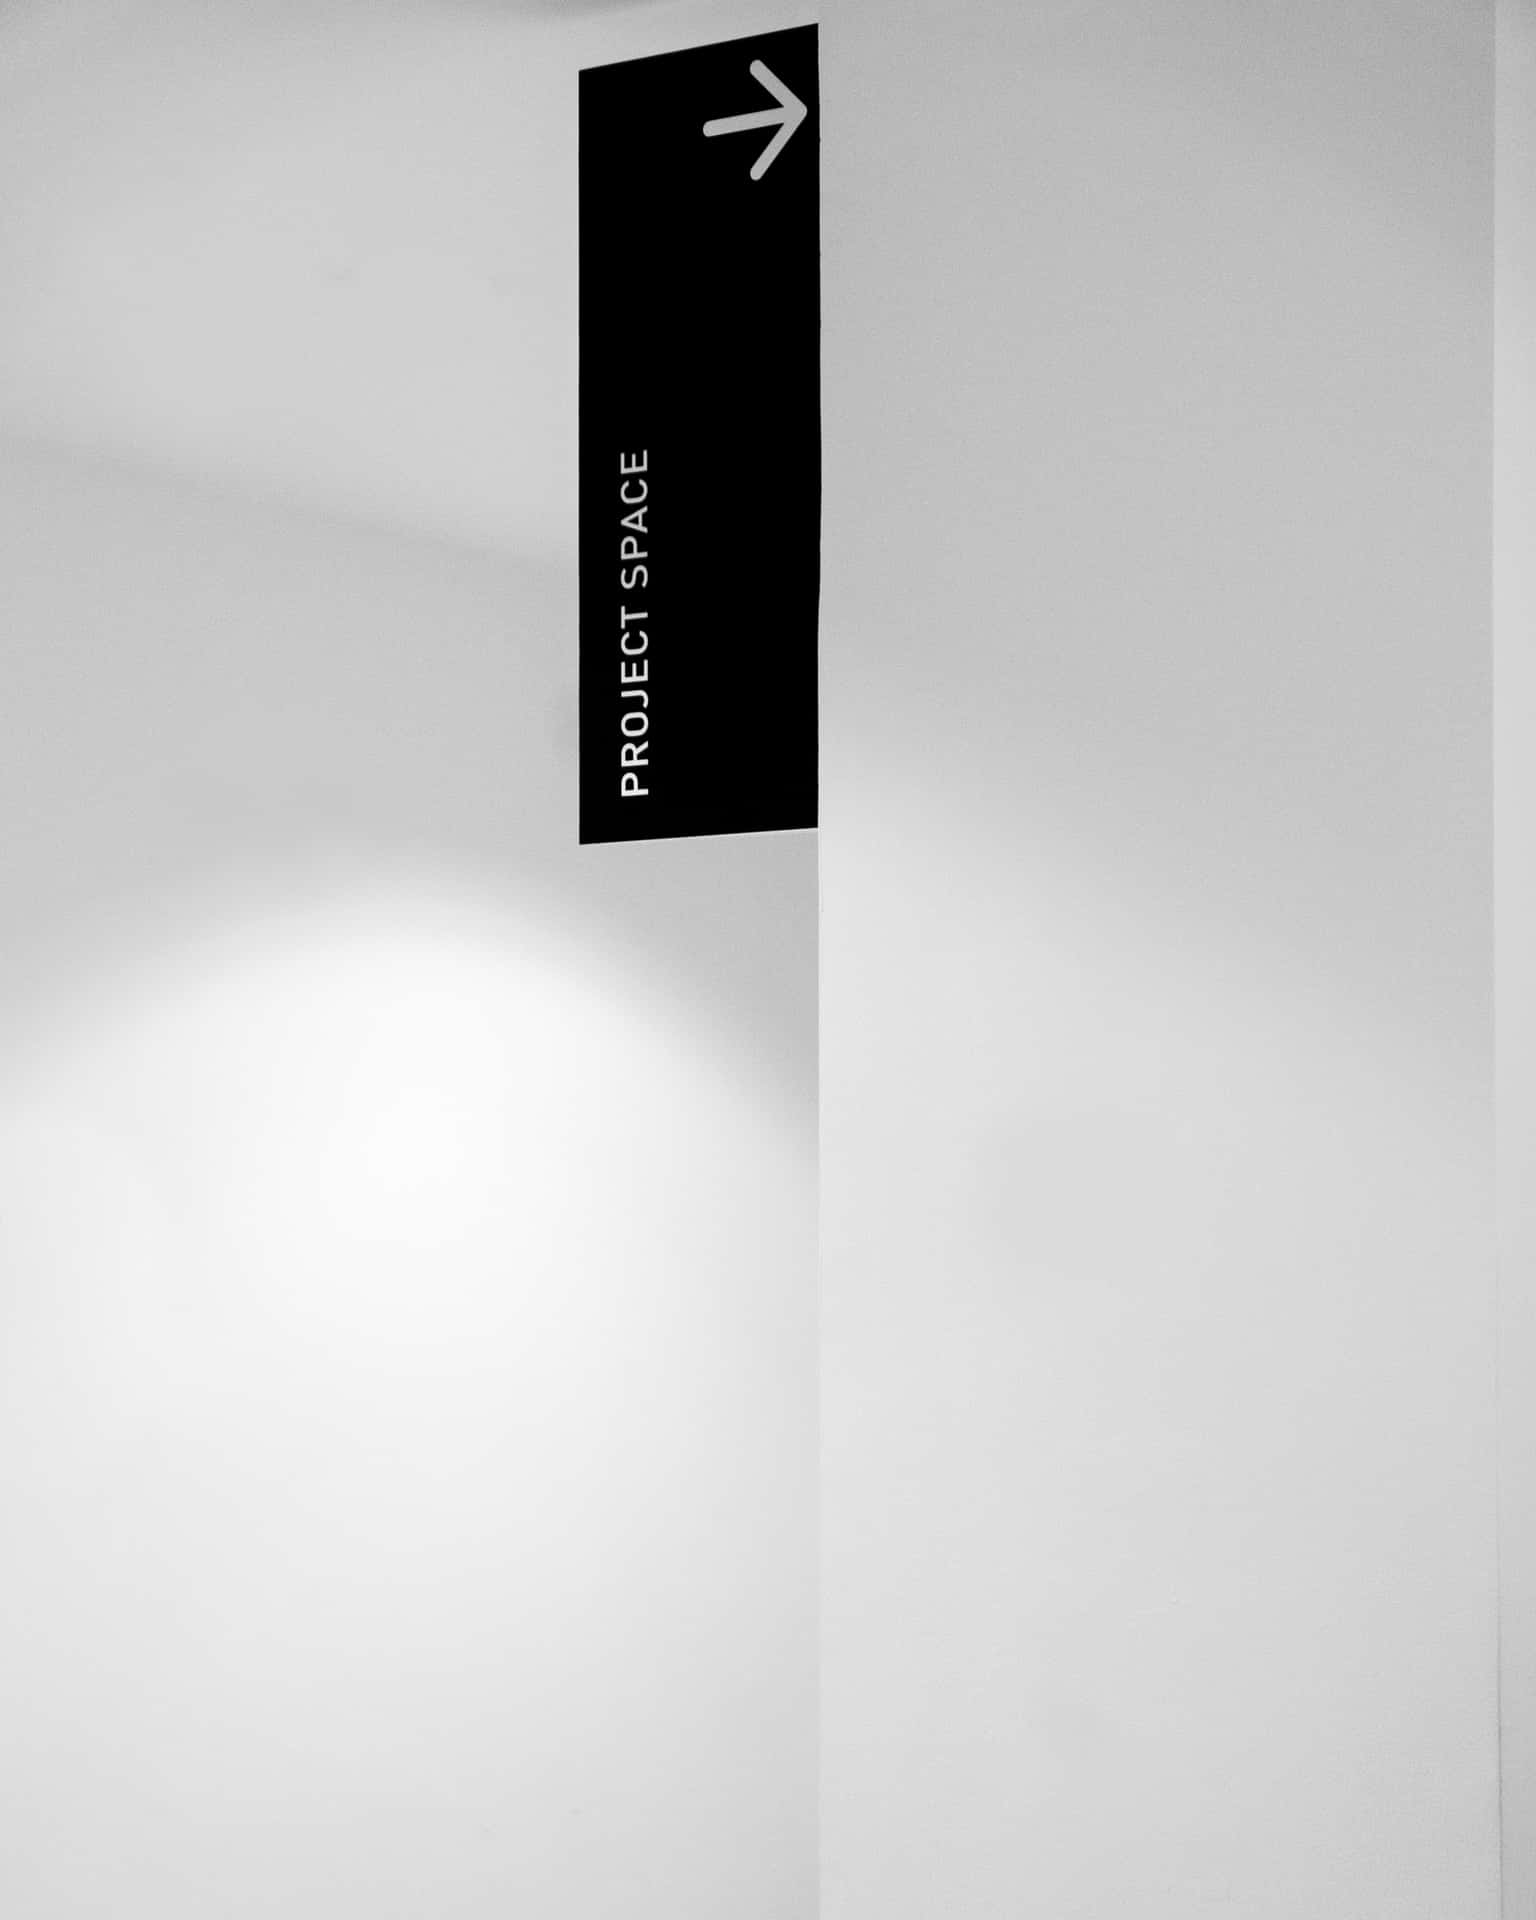 An Elegant Clean Signage Displayed On A Neat Brick Wall Wallpaper